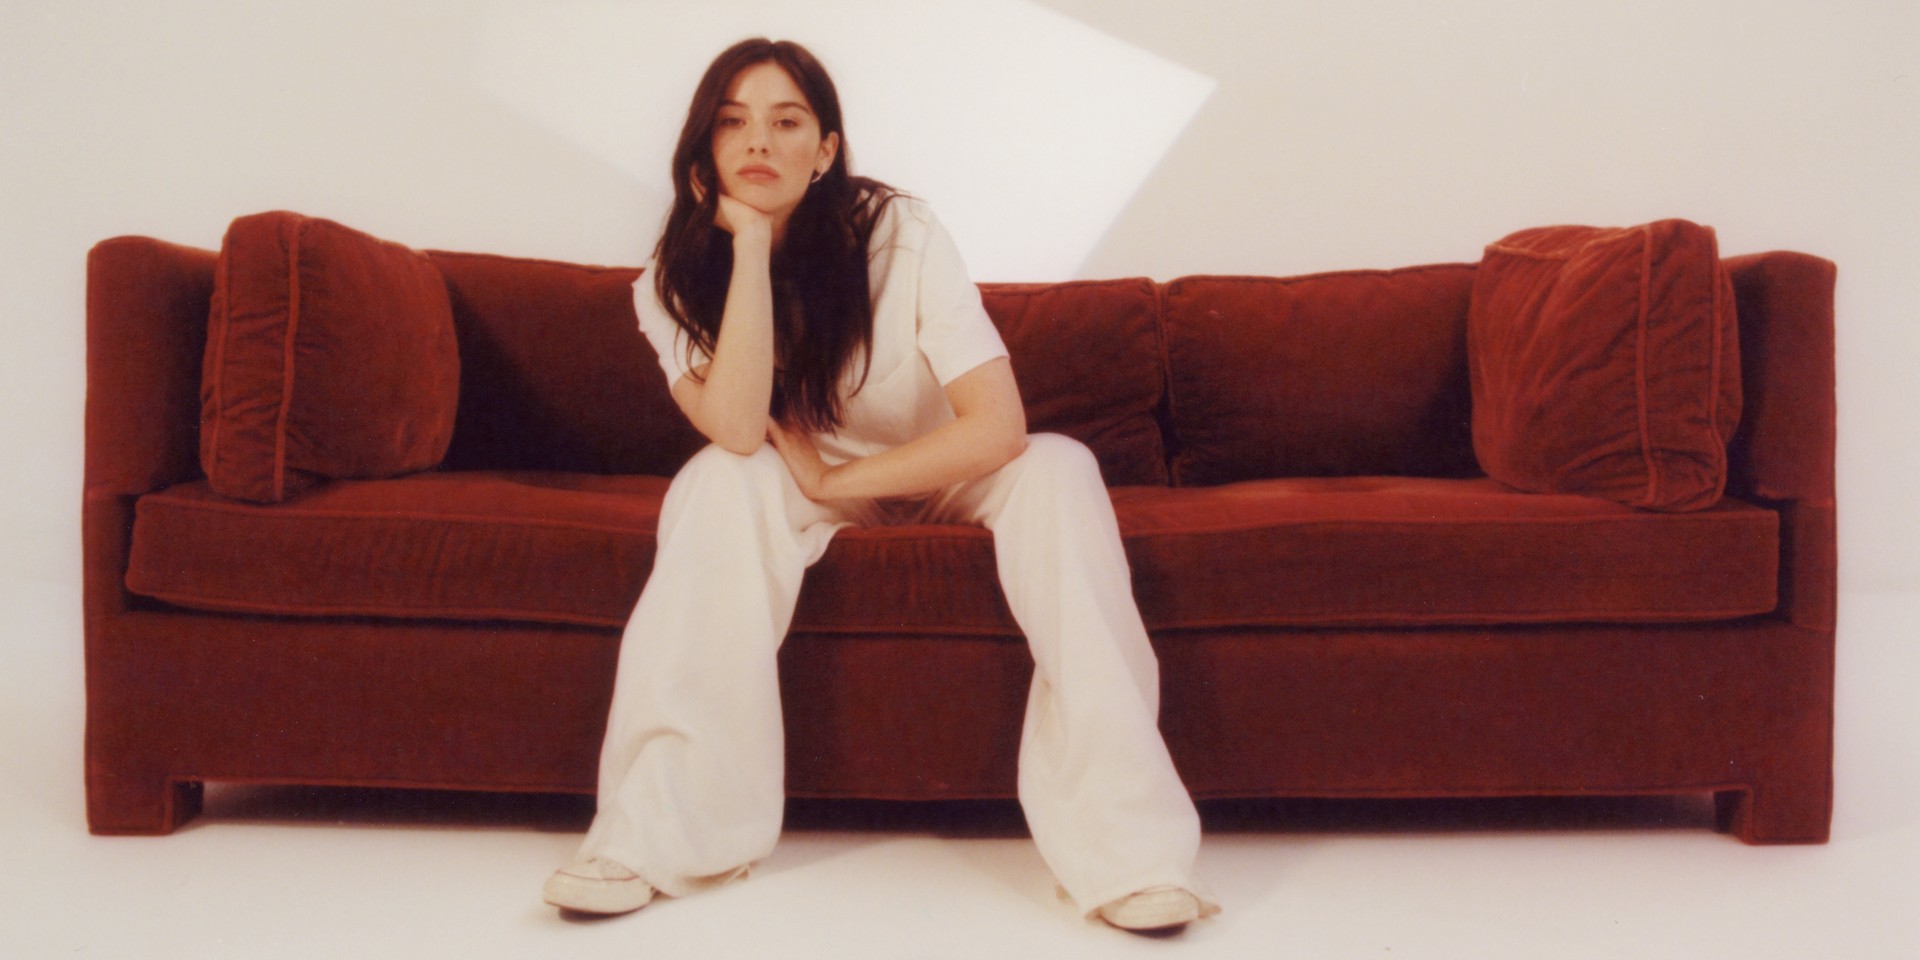 “I feel like I am the most vulnerable when it comes to my music.” Gracie Abrams shares feelings on turning 21, quarantine, and songwriting 